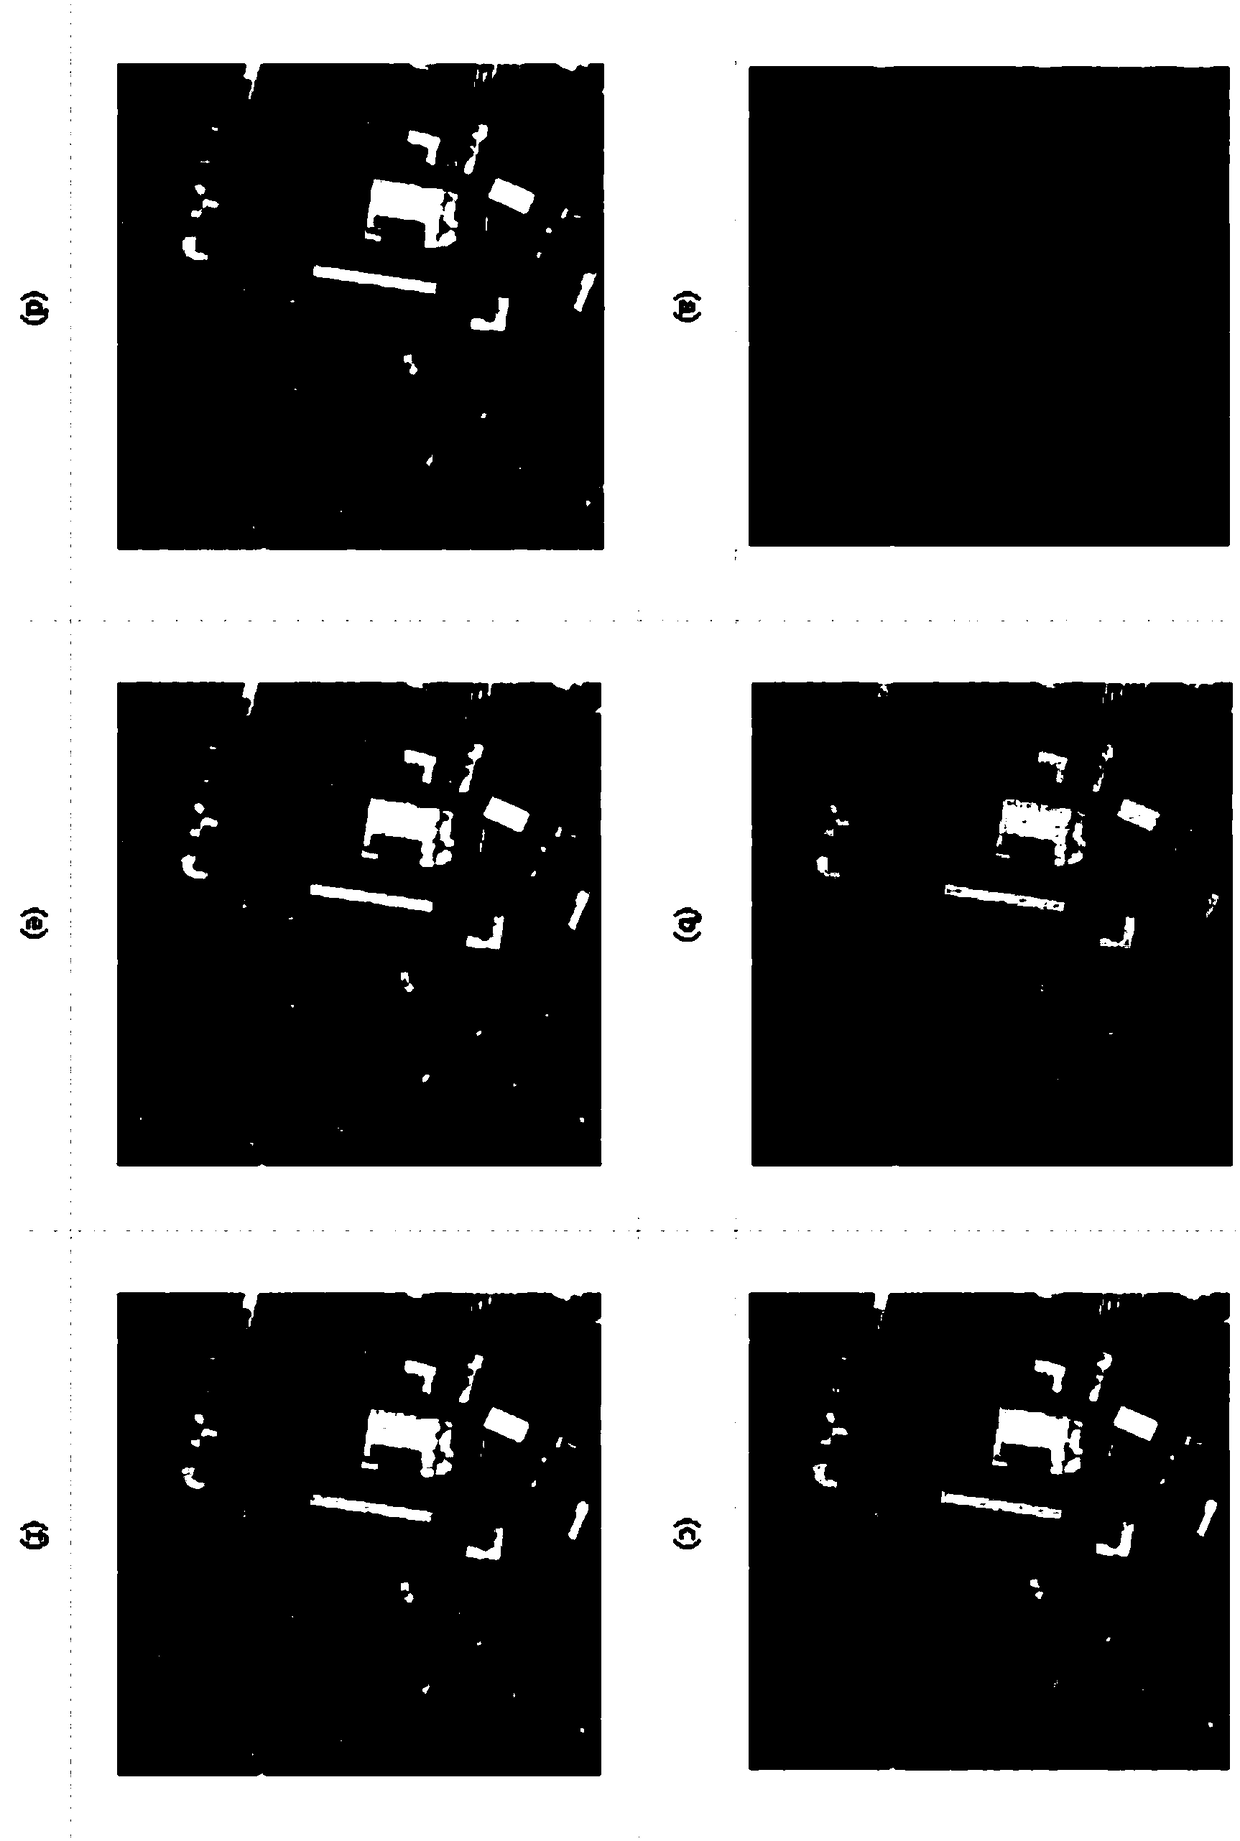 A satellite panchromatic and multispectral image fusion method of a multi-scale convolutional neural network